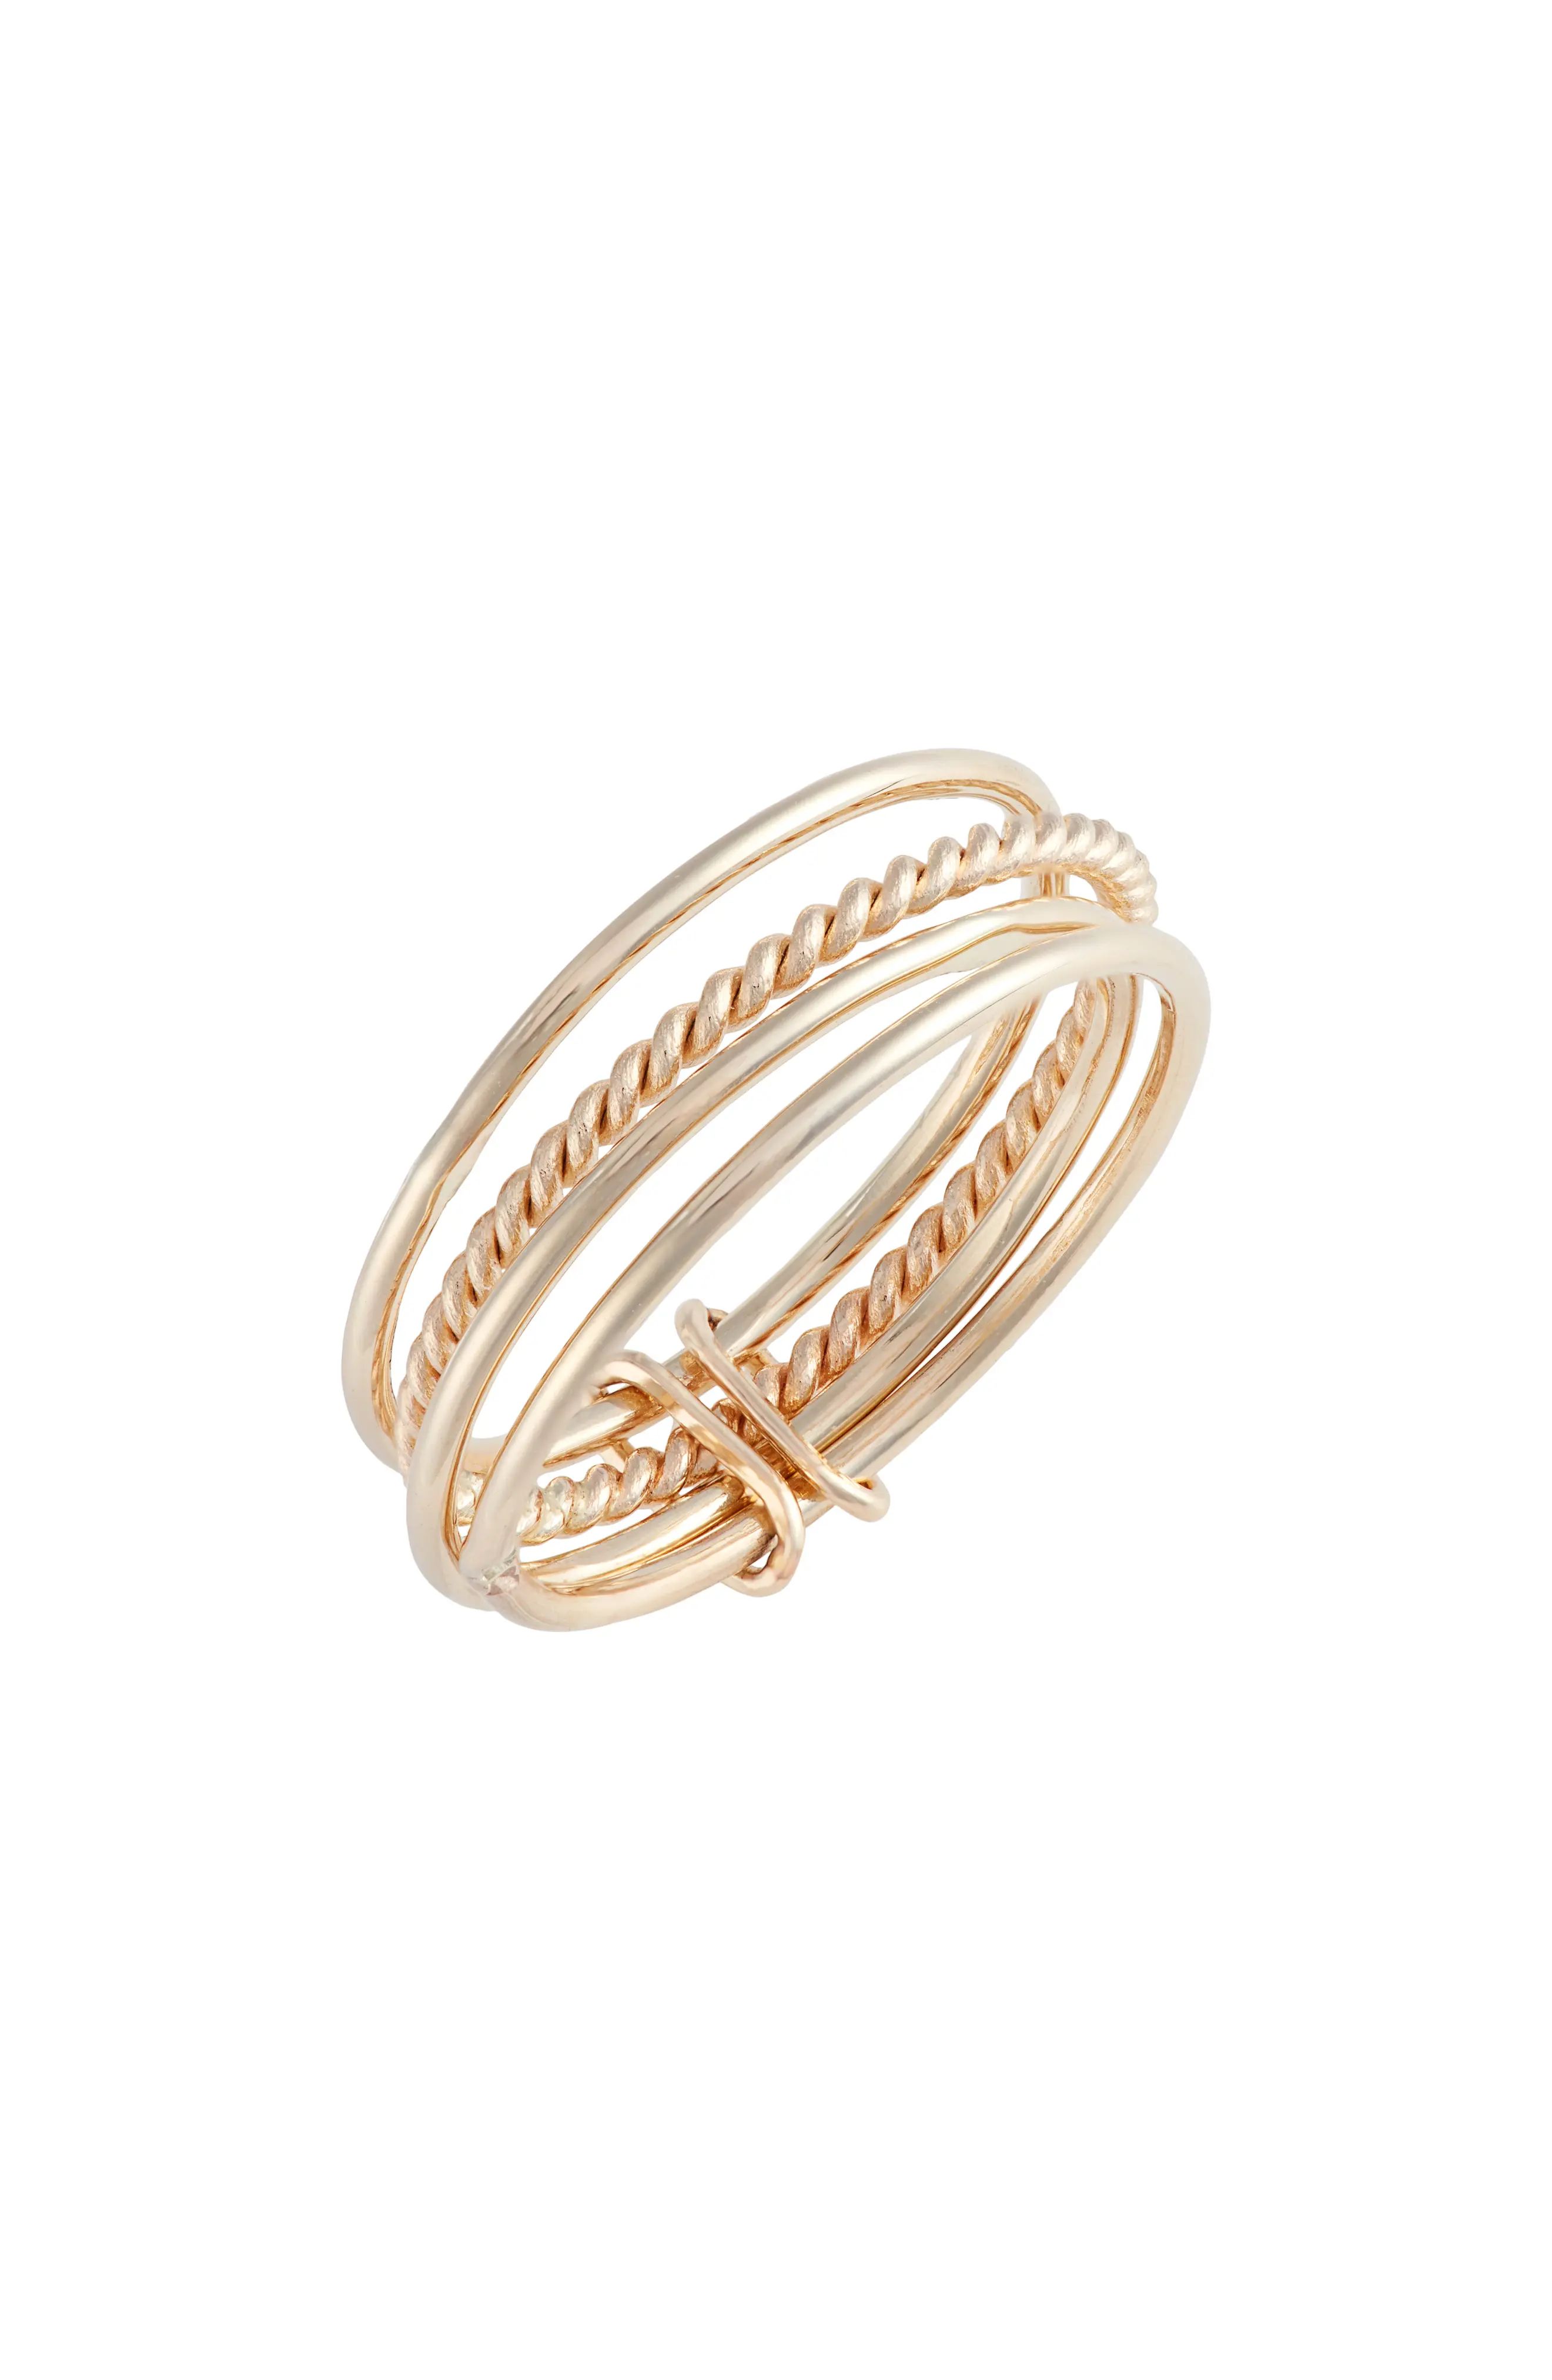 Poppy Finch Attached Stacking Rings | Nordstrom